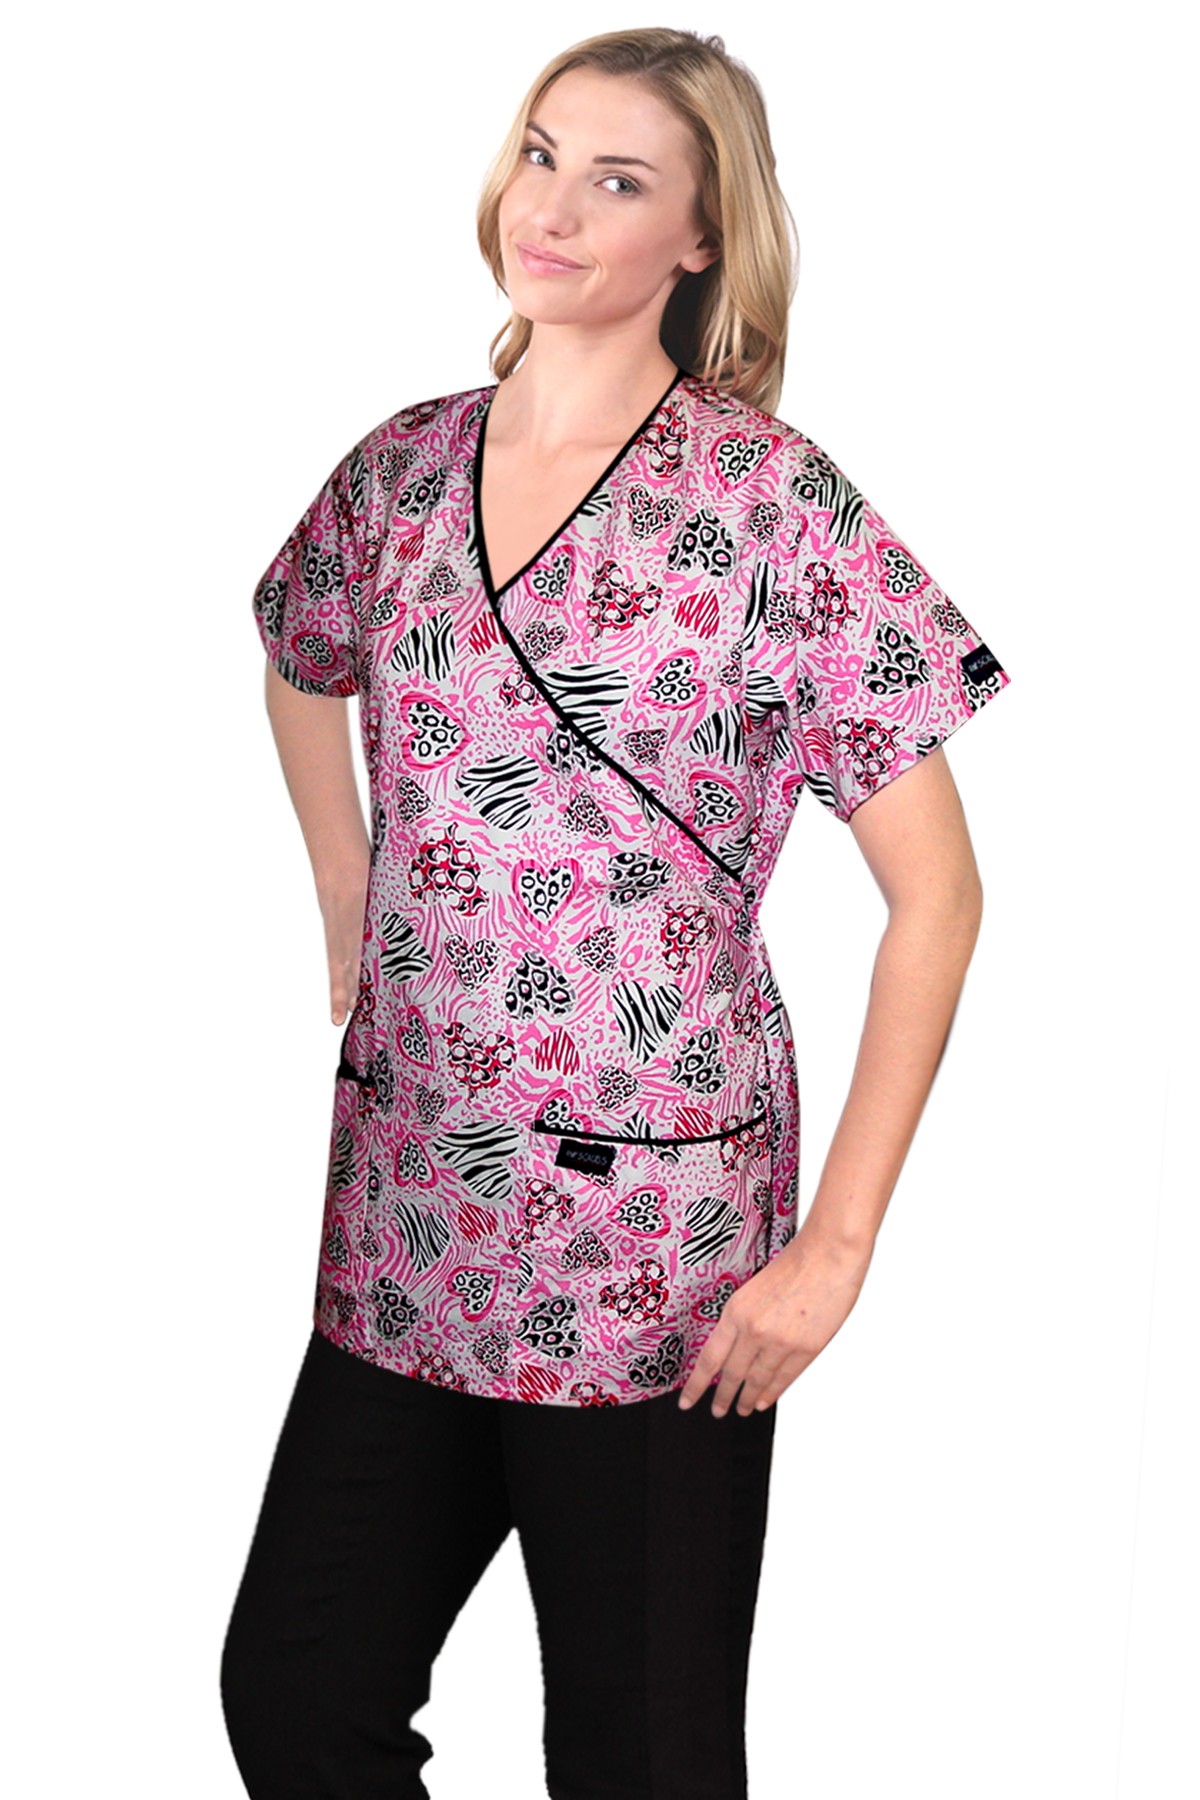 Printed scrub set mock wrap 5 pocket half sleeve in pink and black heart print with black piping (top 3 pocket with bottom 2 pocket boot cut)